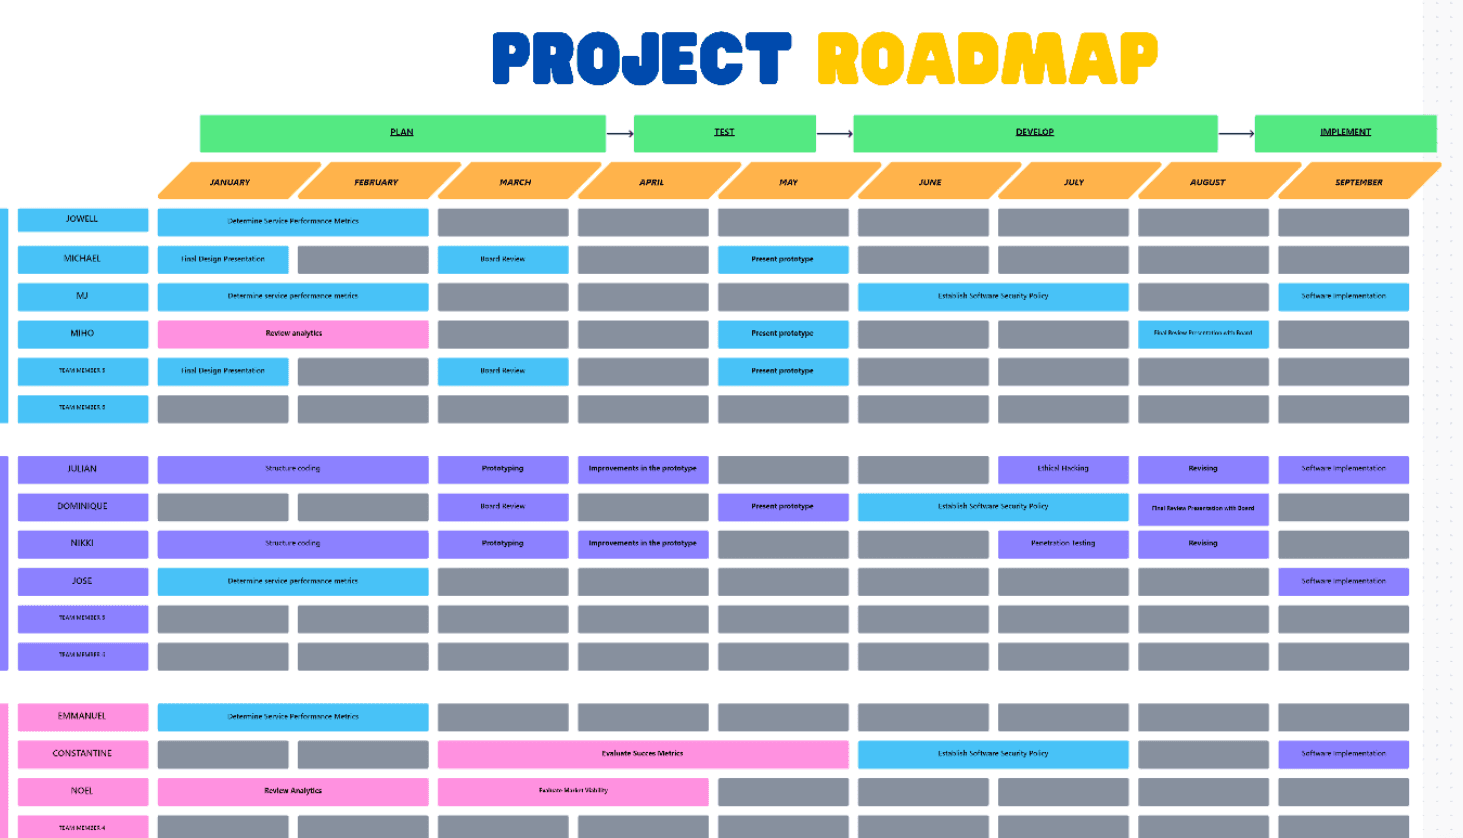 A project roadmap is a summary that lists key deliverables in chronological order. It is a very helpful technique to coordinate project goals and schedules with other teams while also managing stakeholder expectations.